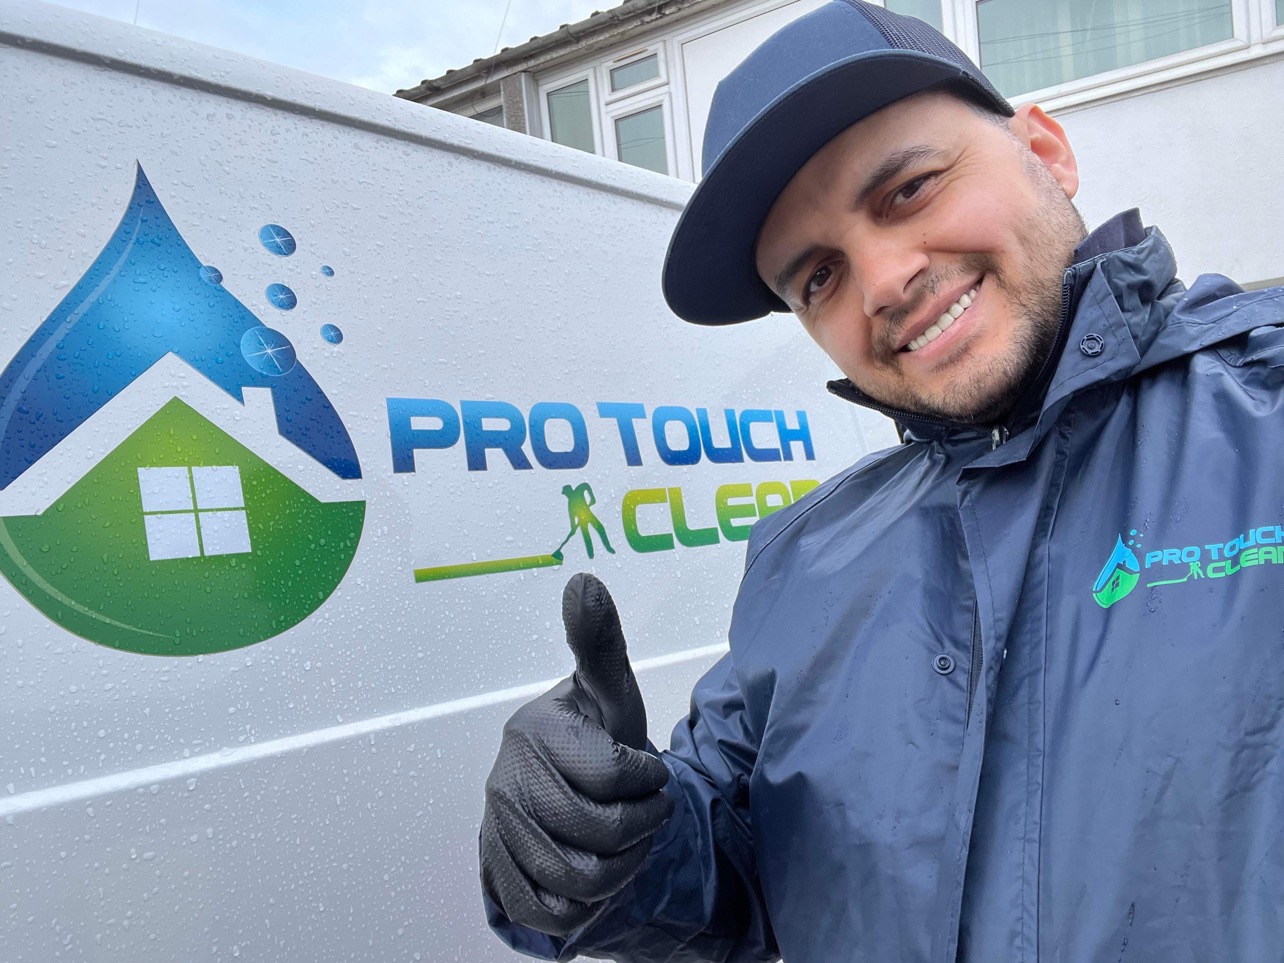 Protouch clean professional upholstery cleaners